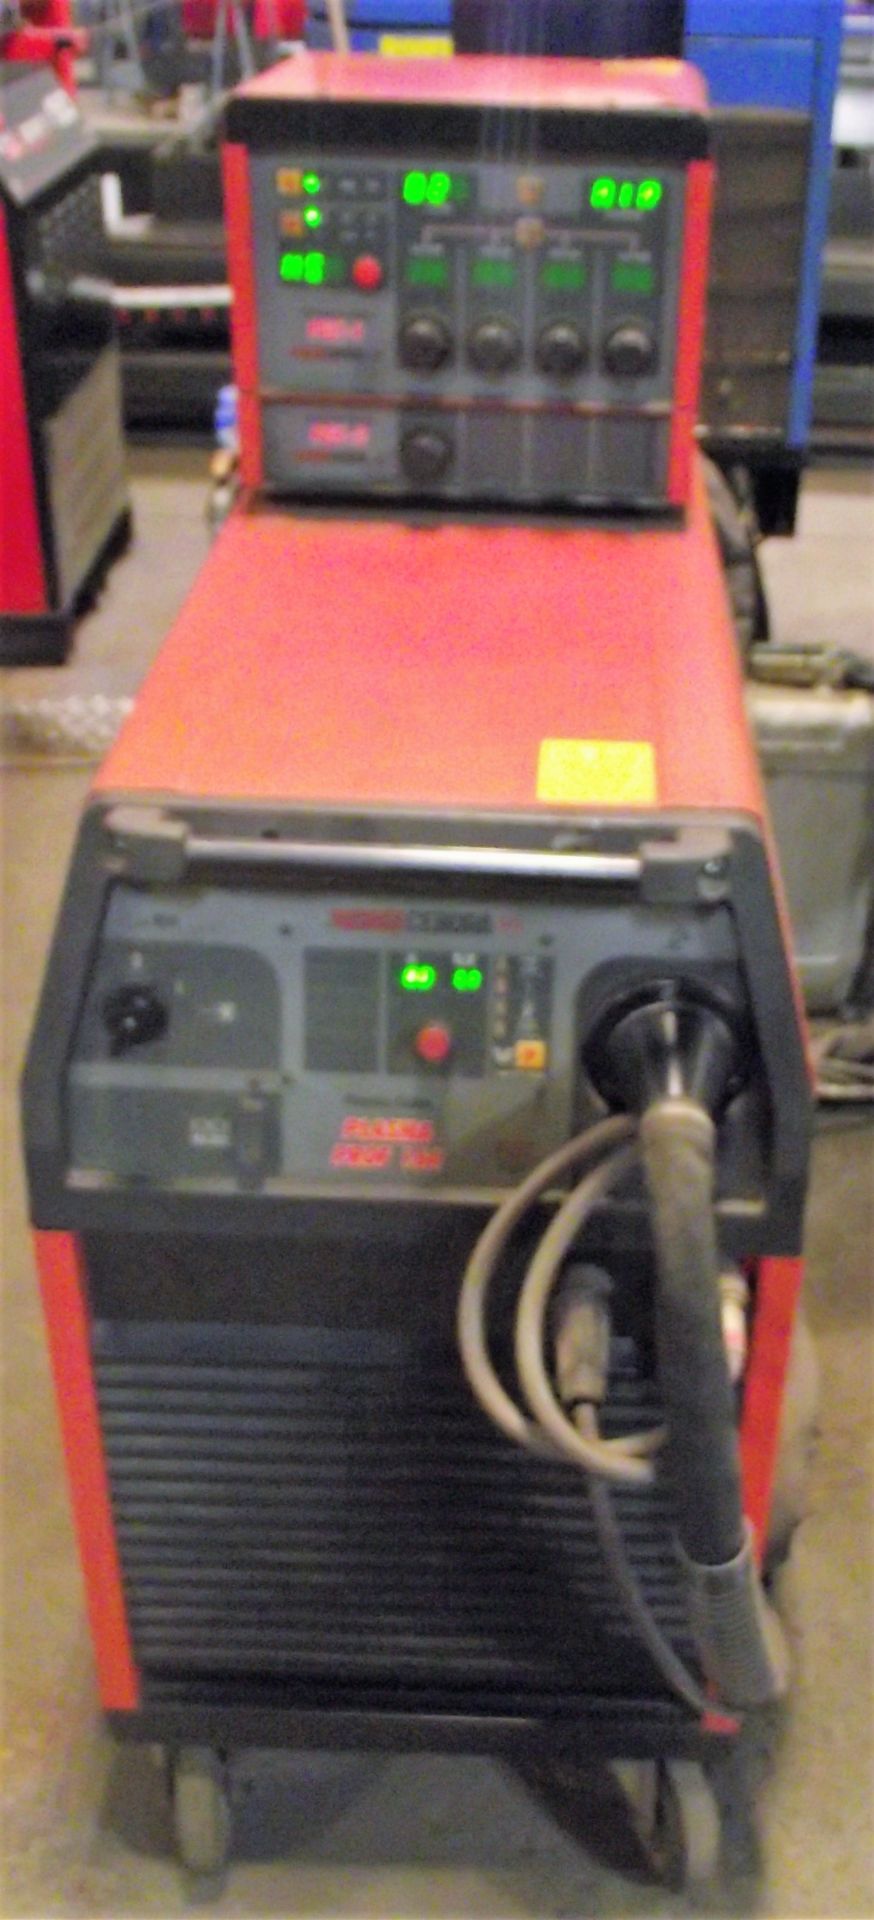 SMS Automation SP2010 PLASMA Cutter cw Support Equipment. - Image 5 of 24